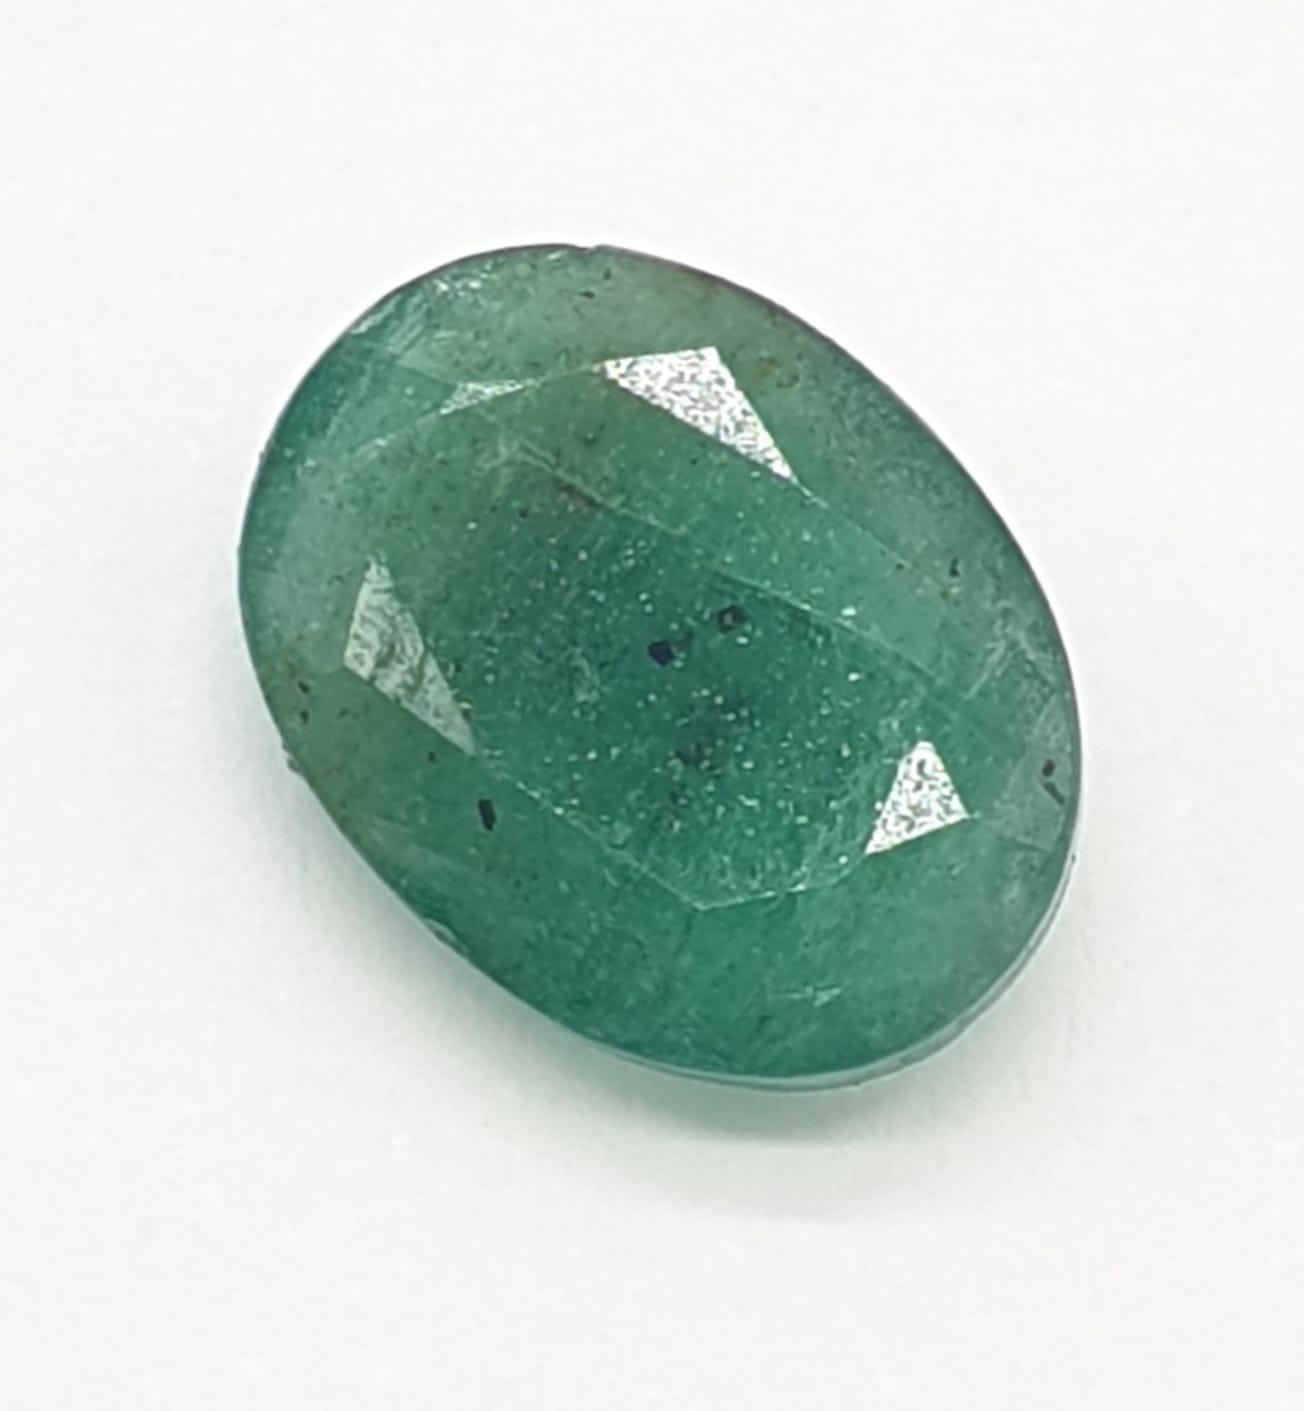 2.64 Cts Natural emerald. Oval mixed. ITLGR certification provided.